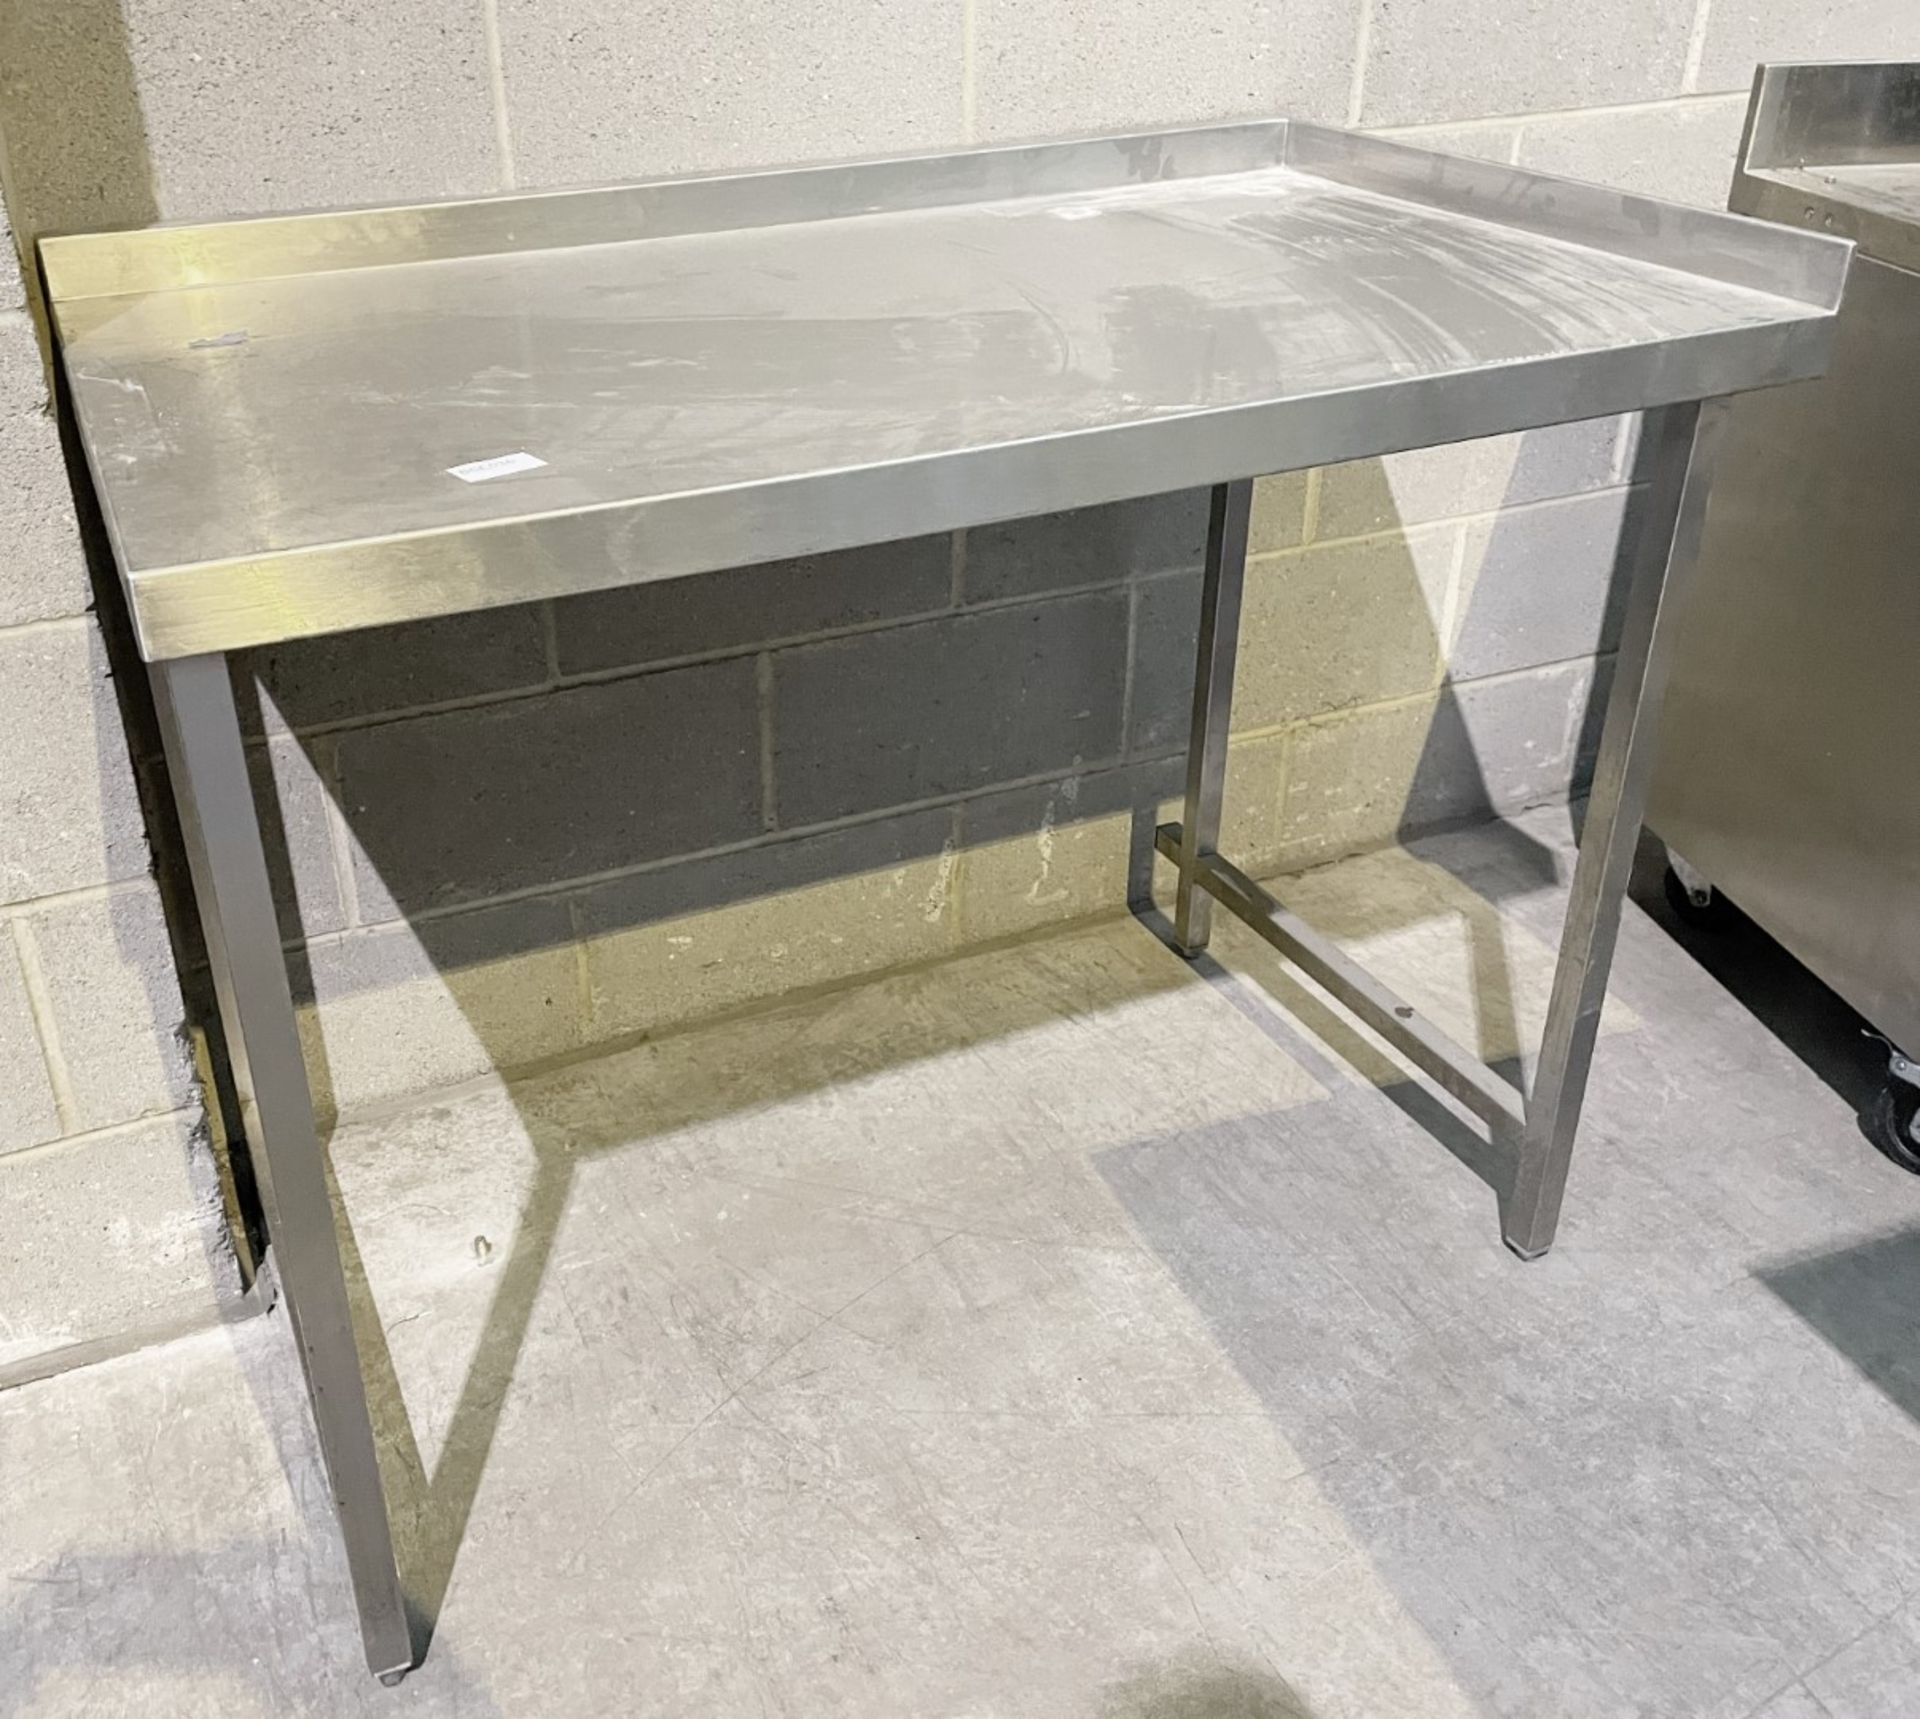 1 x Stainless Steel Commercial Prep Table With Corner Upstand - Dimensions: W118x70x87cm - Ref: - Image 3 of 5